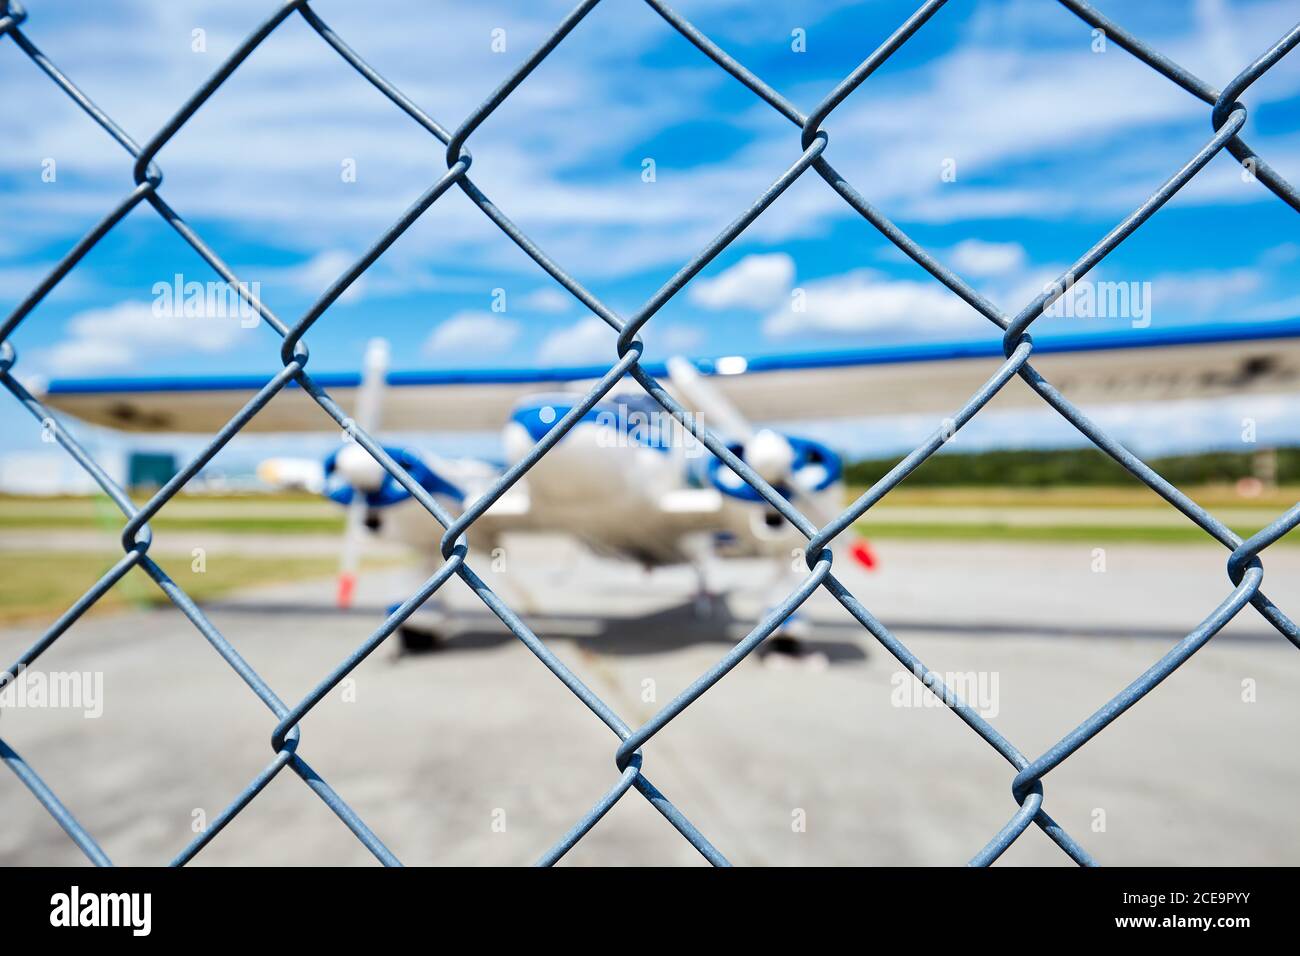 Aircraft on runway behind wire mesh fence Stock Photo